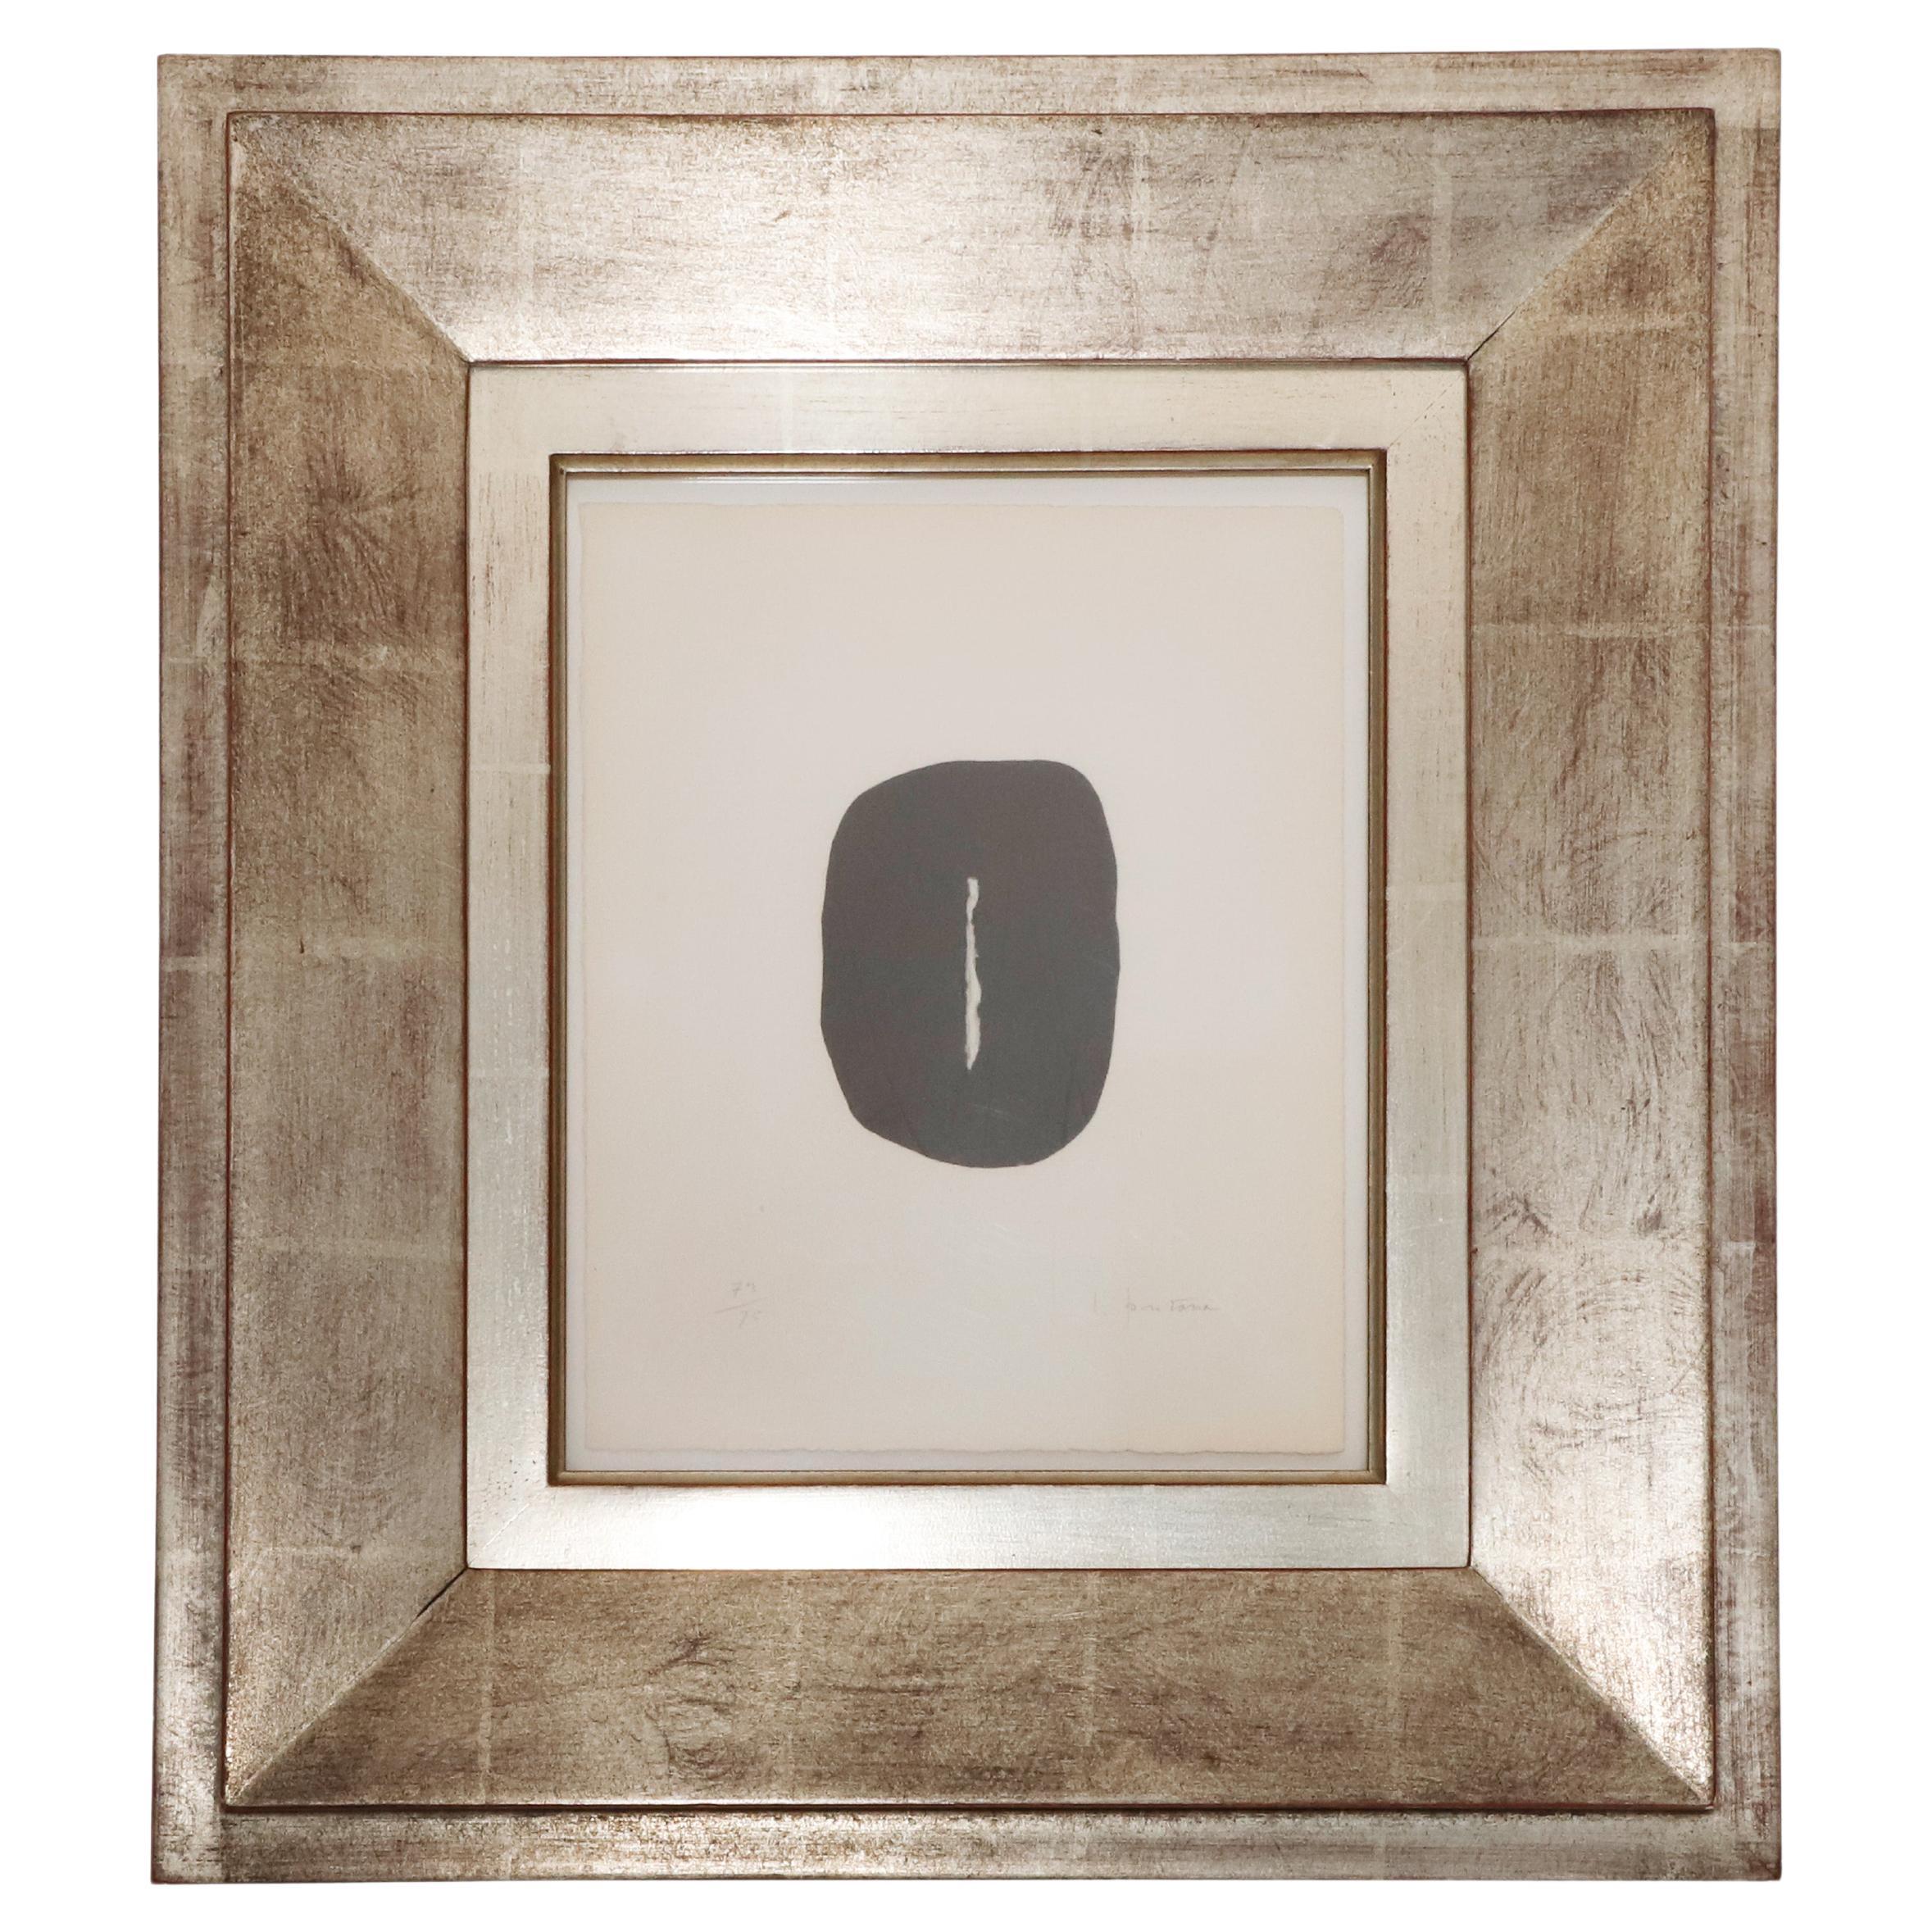 Lucio Fontana Print Titled "Utan Titel" on Frame, Signed and Numbered For Sale